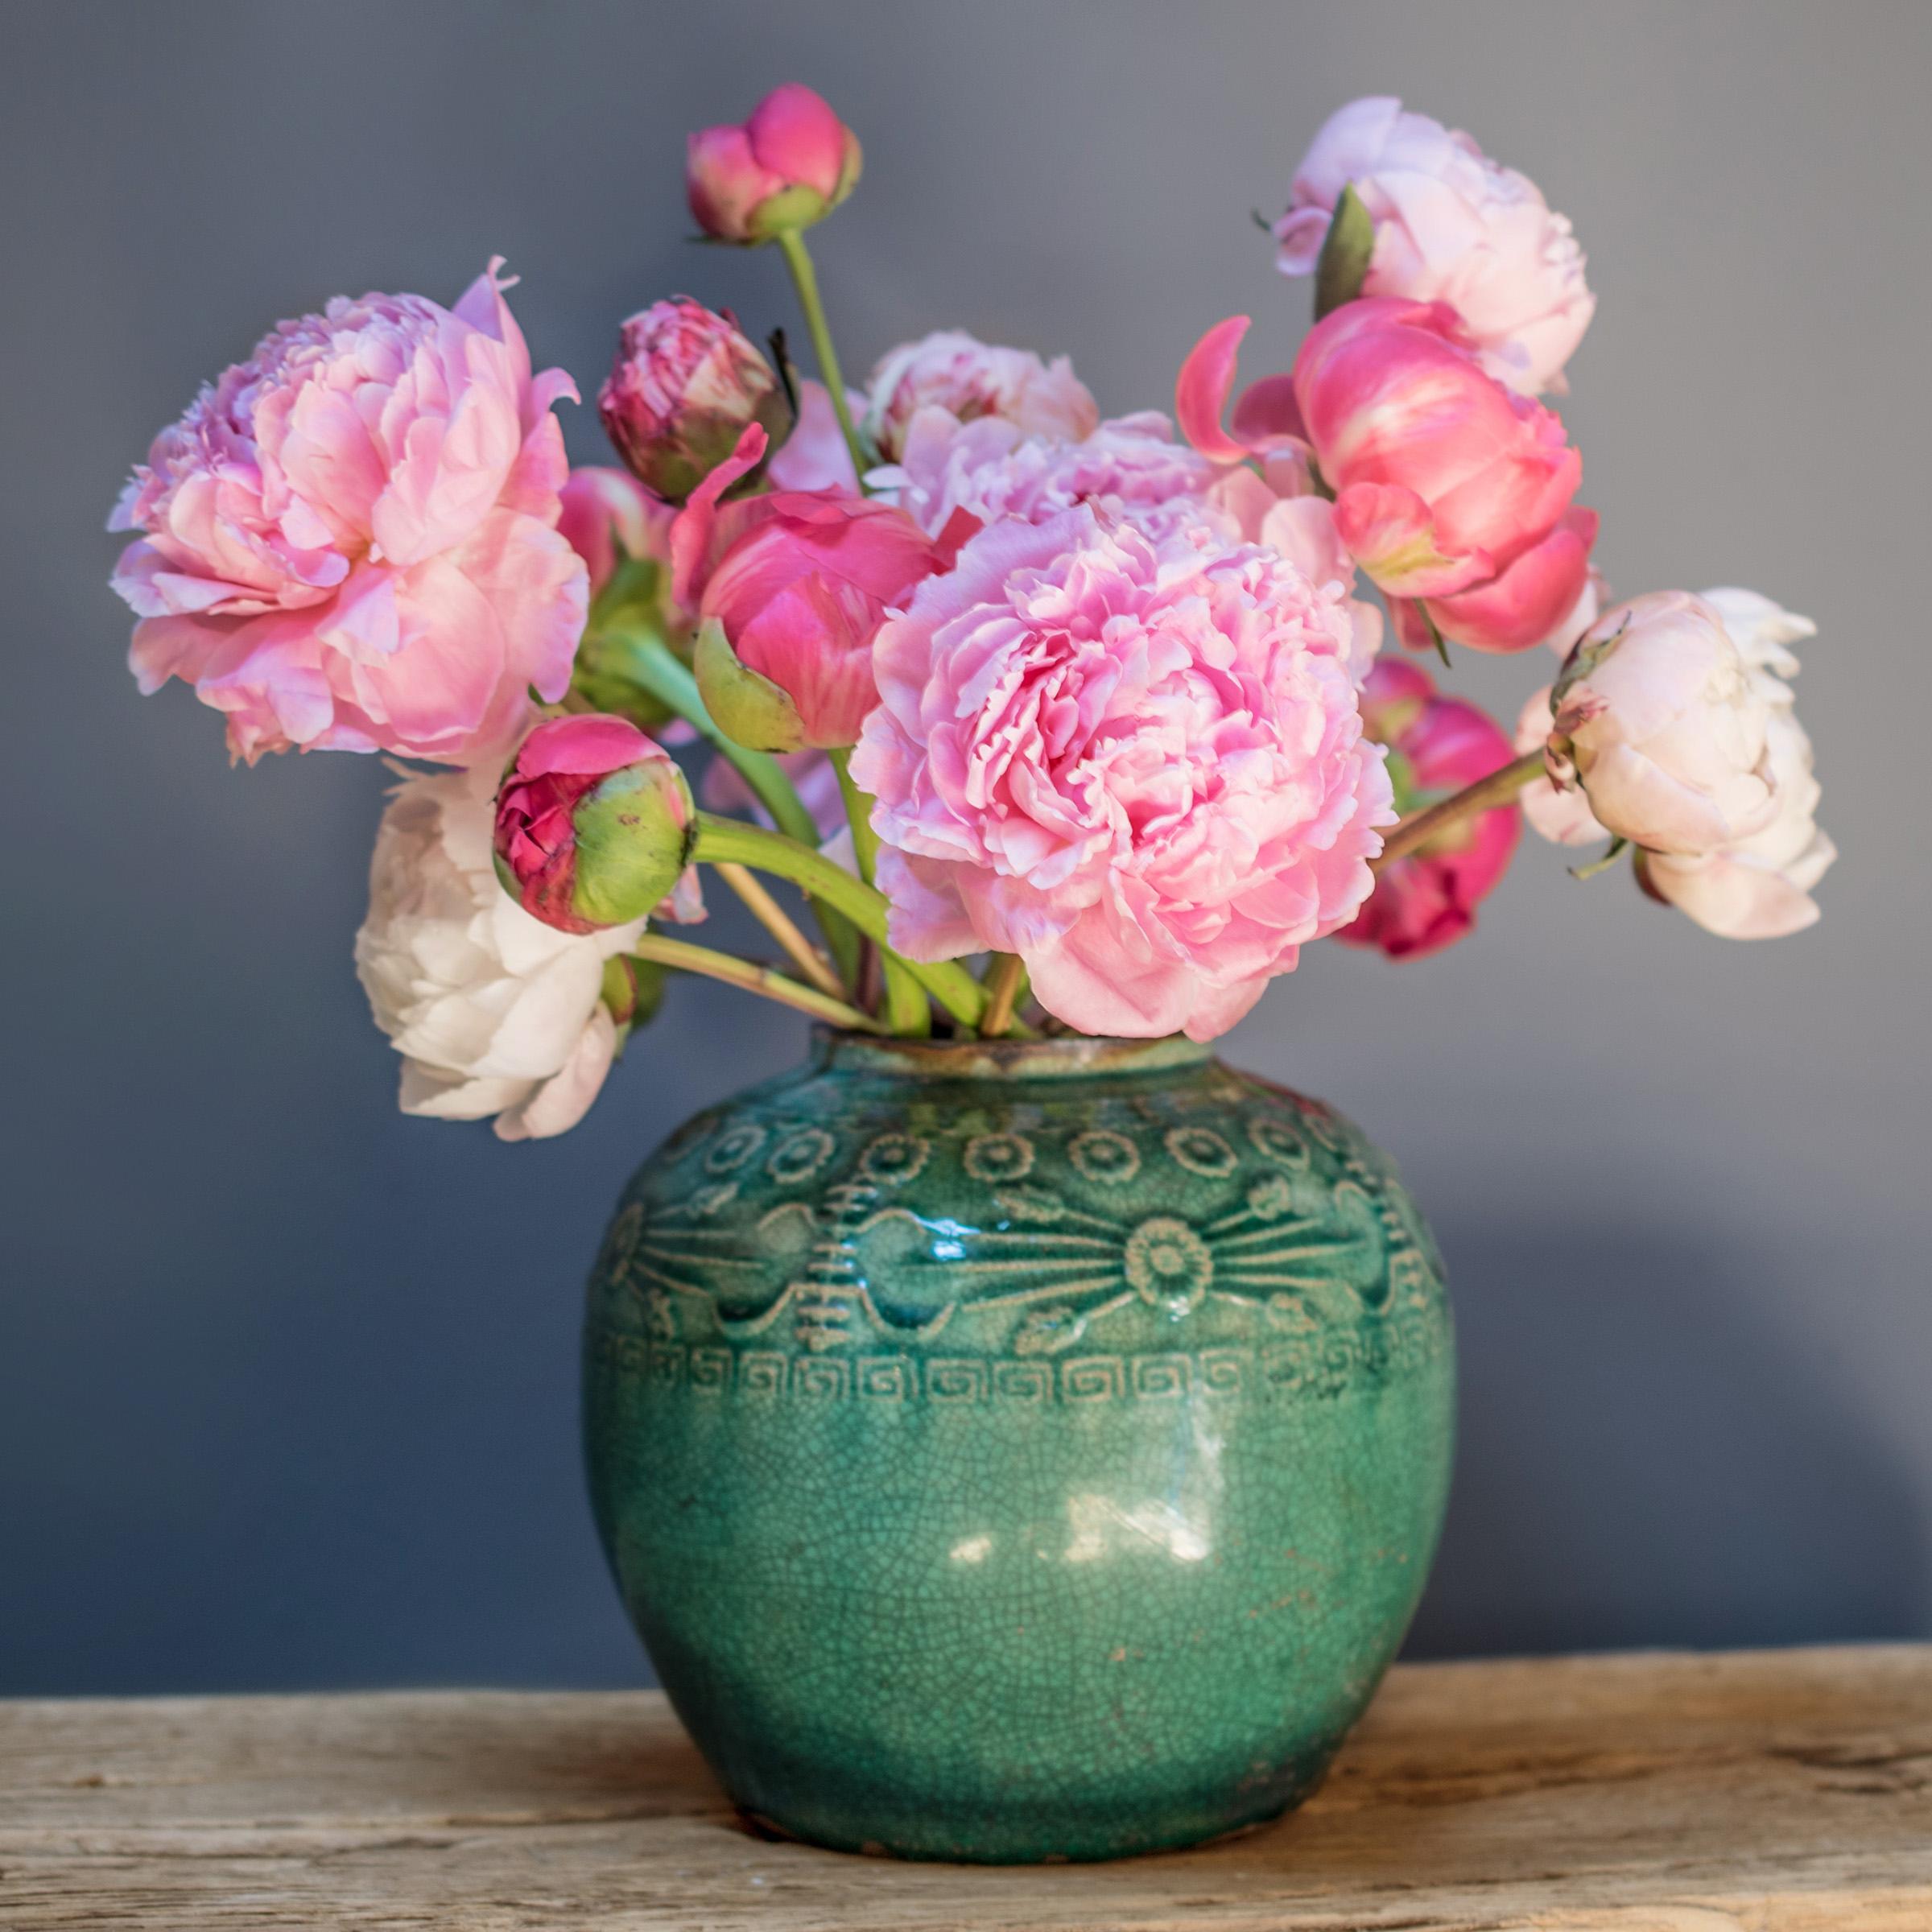 A glassy, blue-green glaze sheets, pools, and drips across the rounded body of this provincial kitchen pot, lingering beautifully on the low relief decoration to the jar's shoulders. Among the raised patterns are round chrysanthemum blossoms and